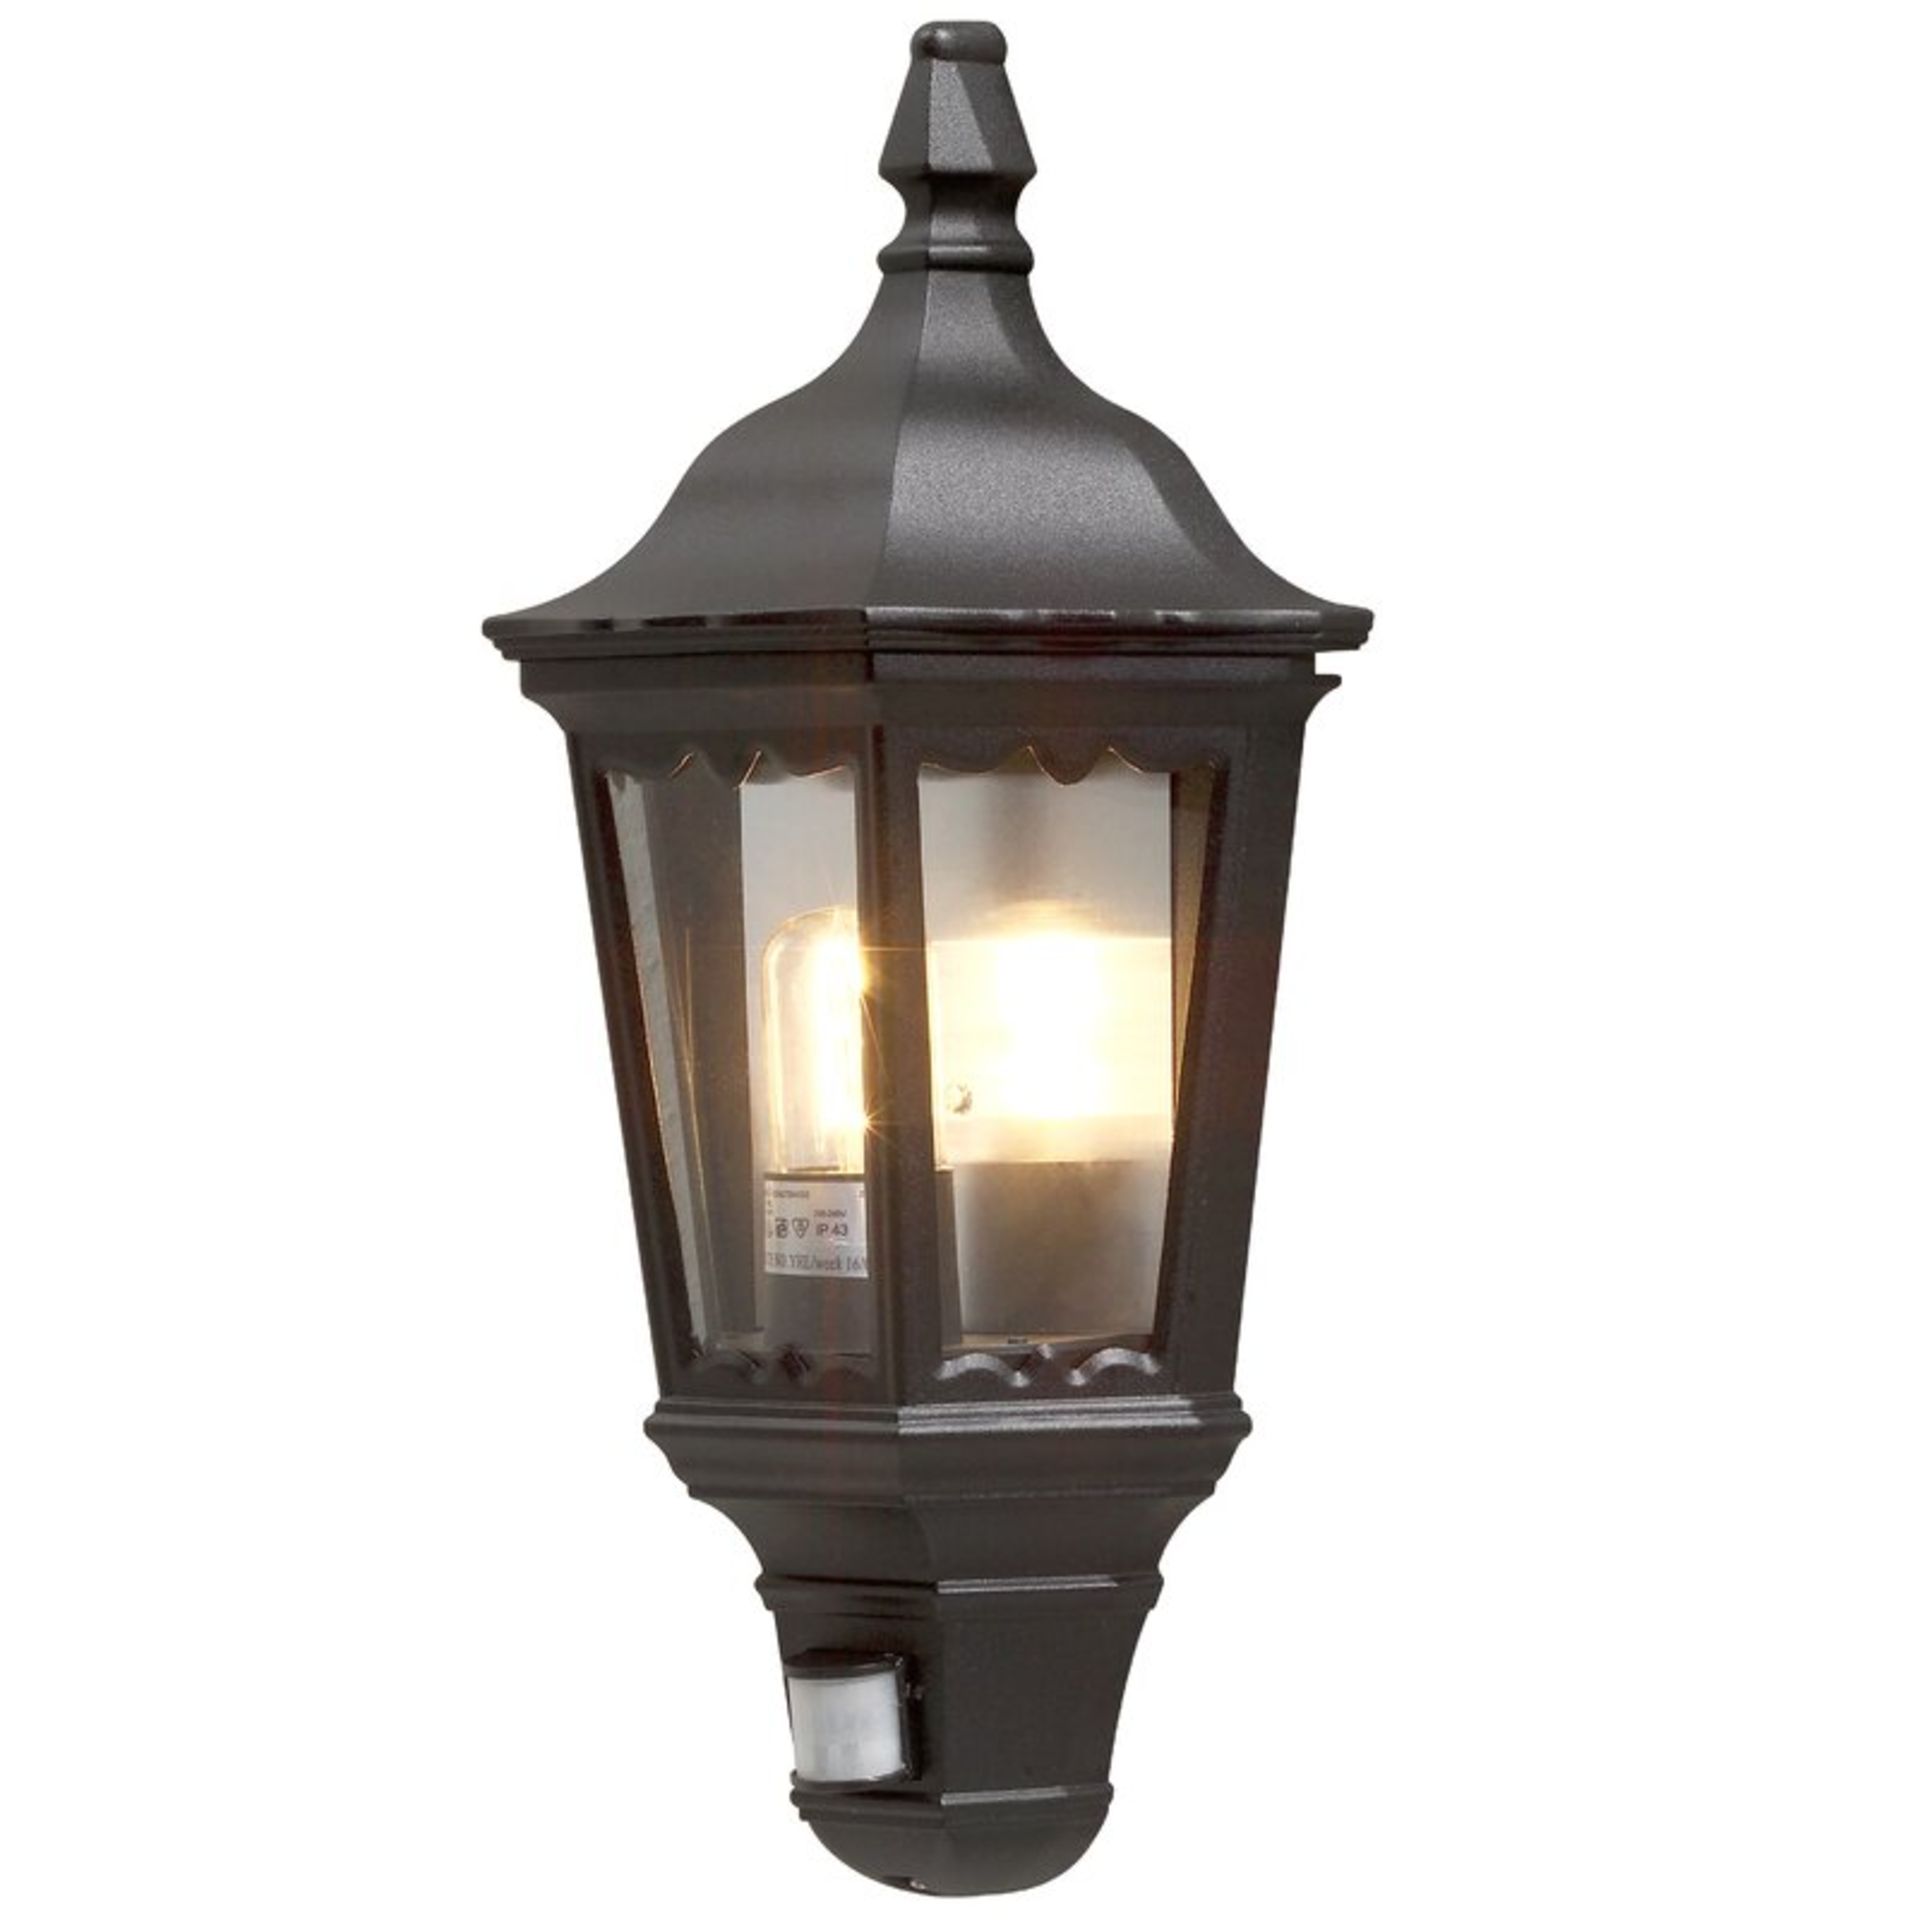 Pandit 1 Light Outdoor Flush Mount by Brambly Cottage - Image 2 of 3